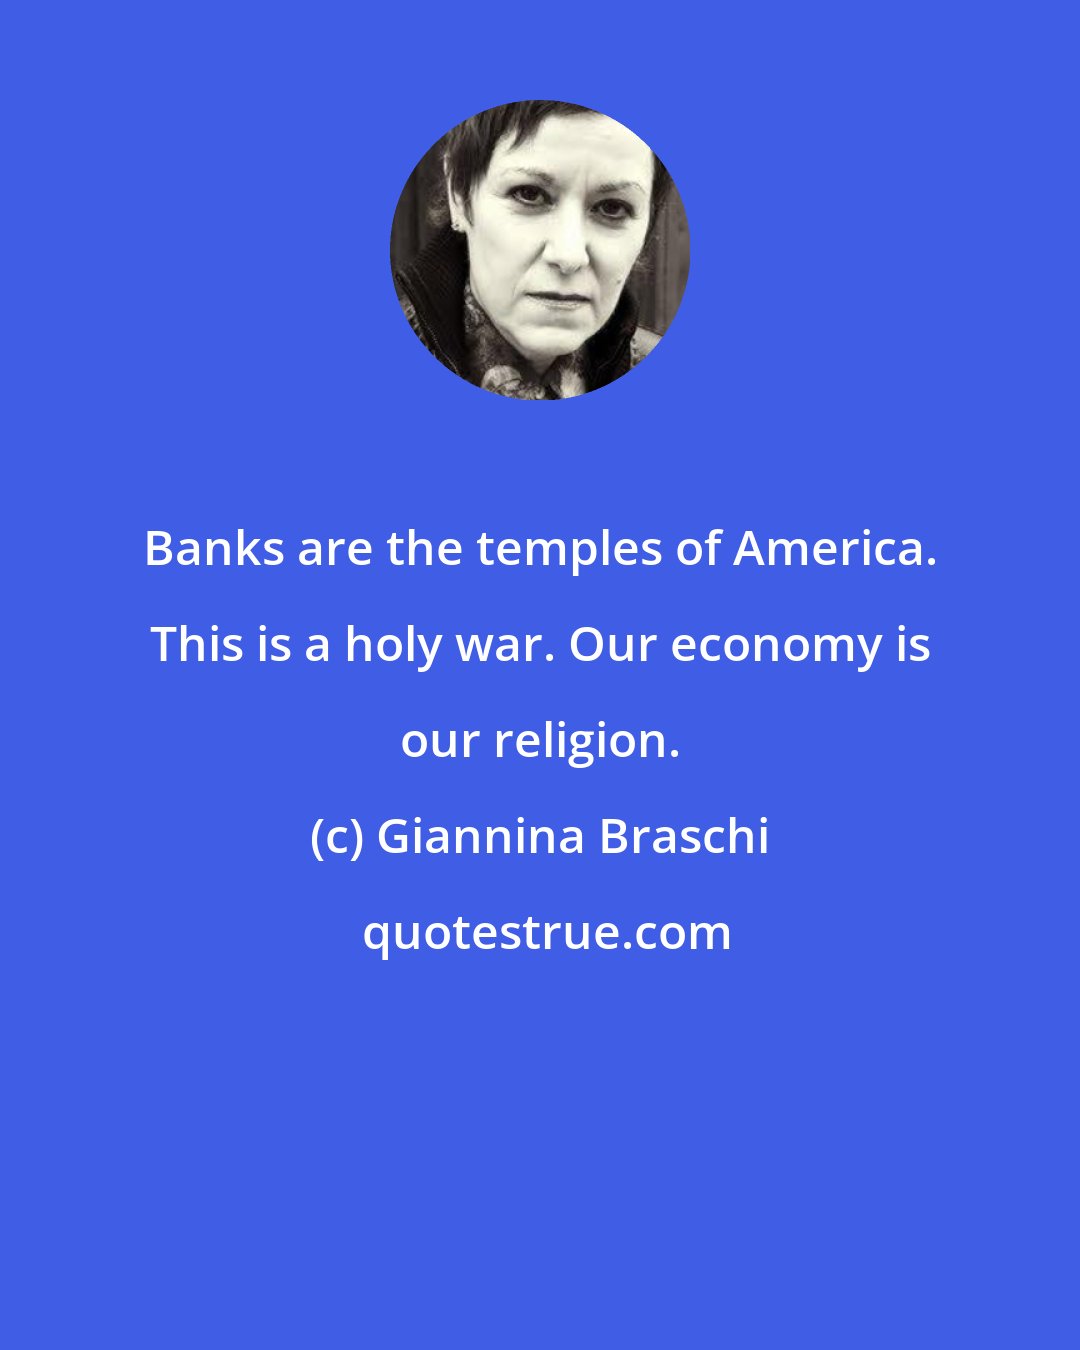 Giannina Braschi: Banks are the temples of America. This is a holy war. Our economy is our religion.